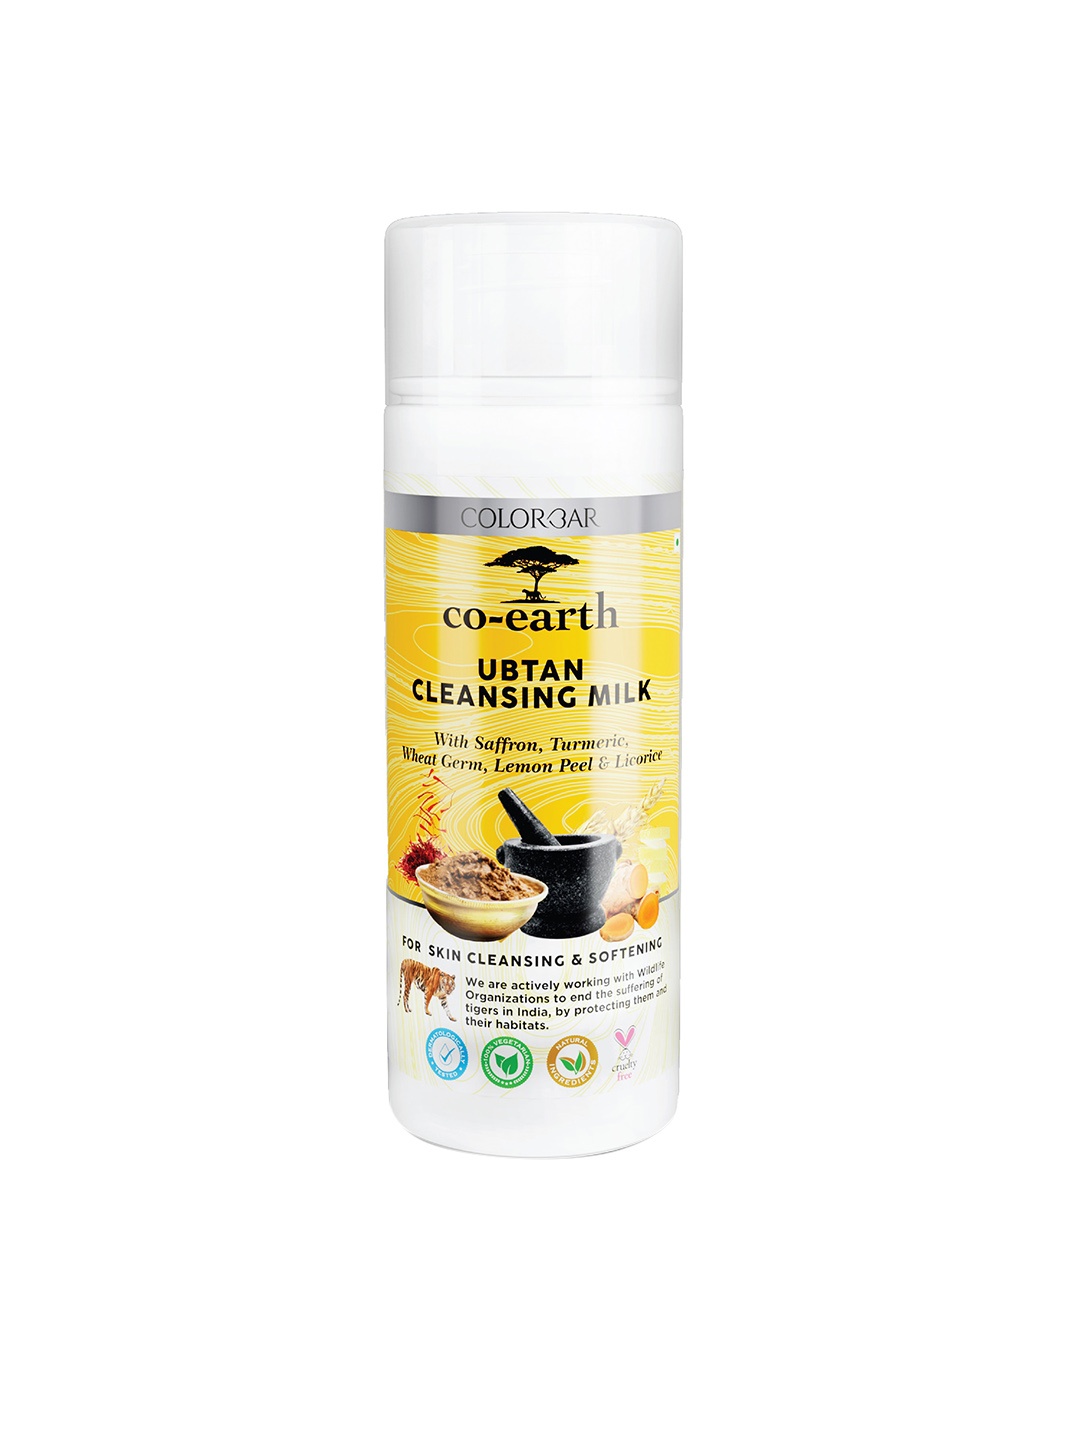 

Colorbar Co-Earth Ubtan Cleansing Milk 200 ml, Yellow